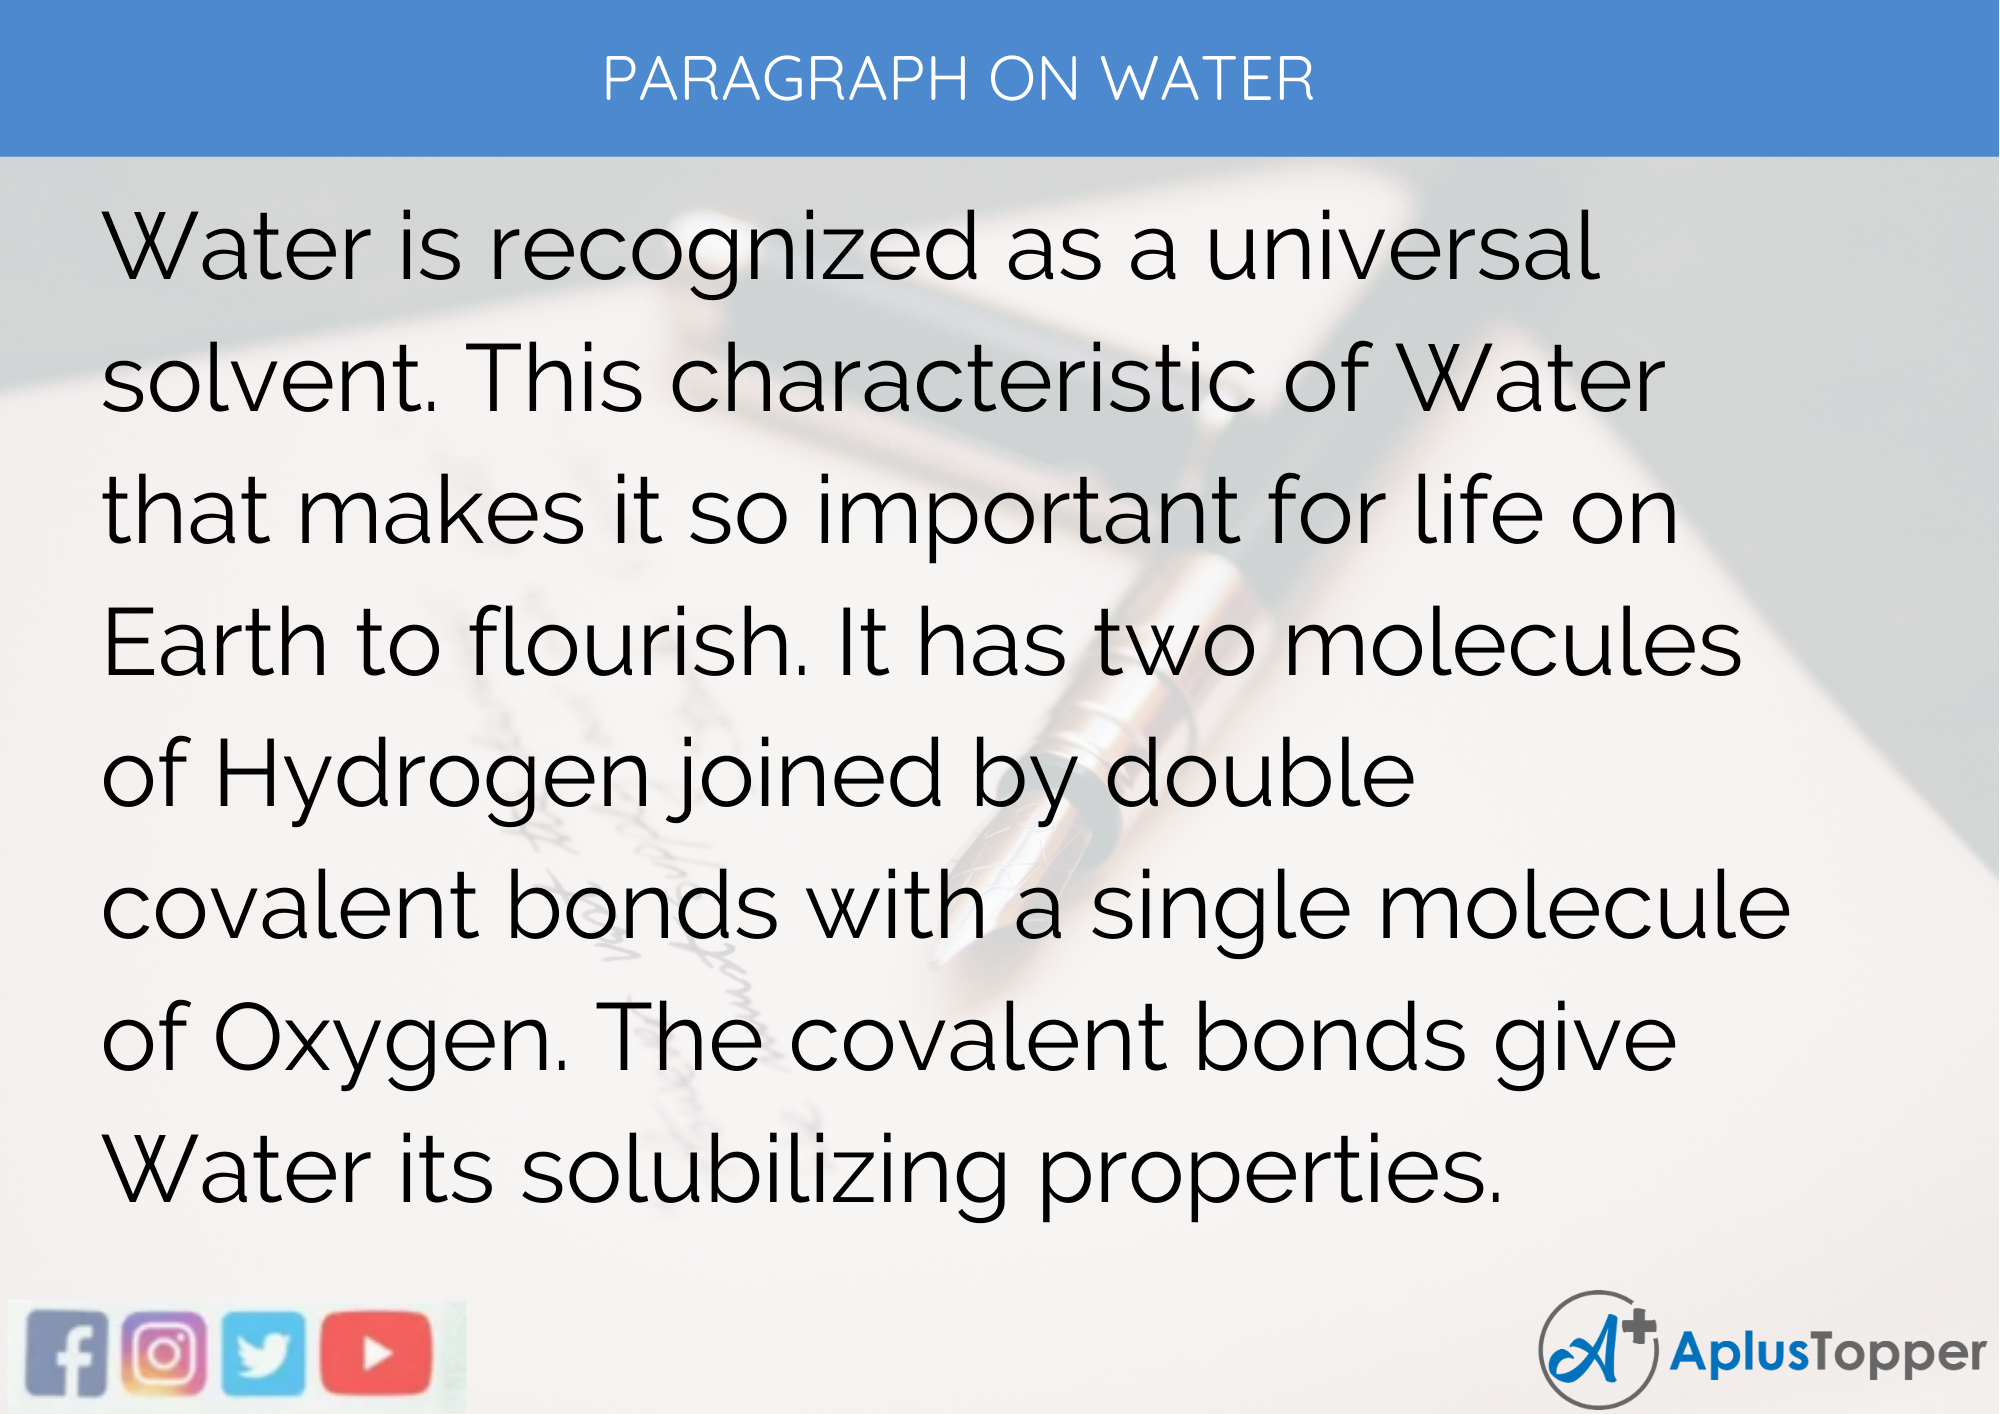 Paragraph on Water for class 9 to 12, and Competitive exams